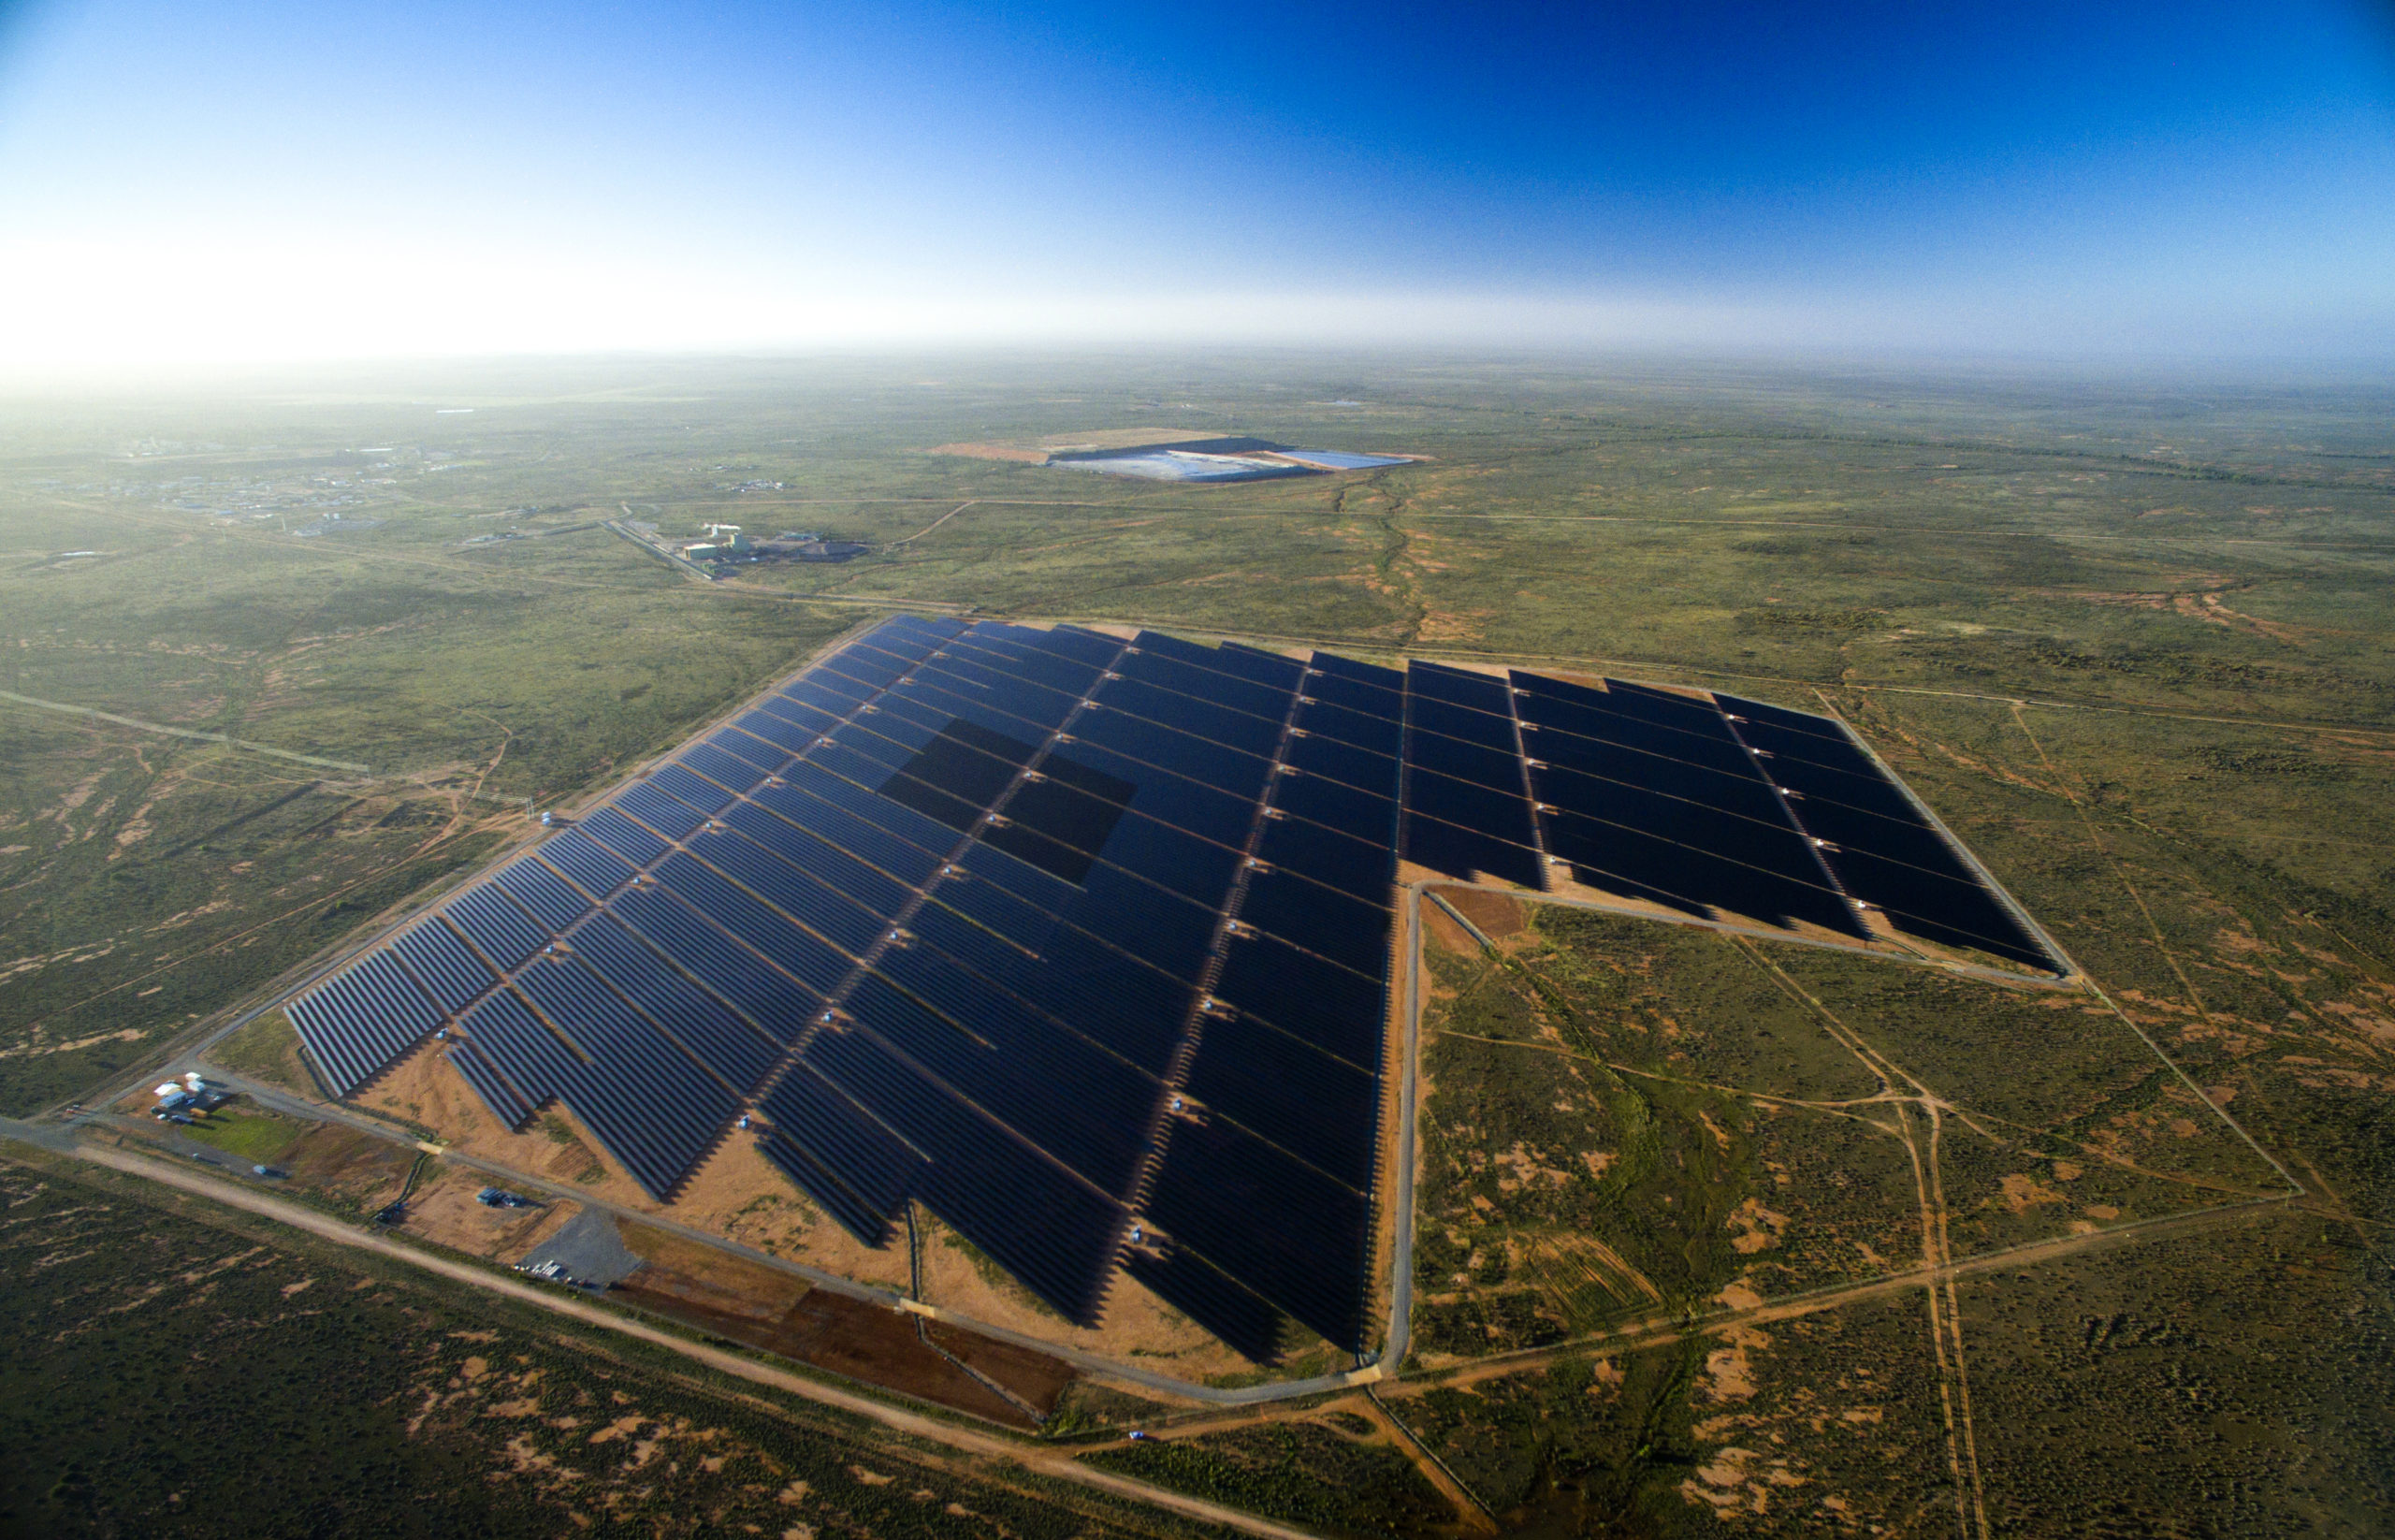 Ariel view of large scale solar power plant